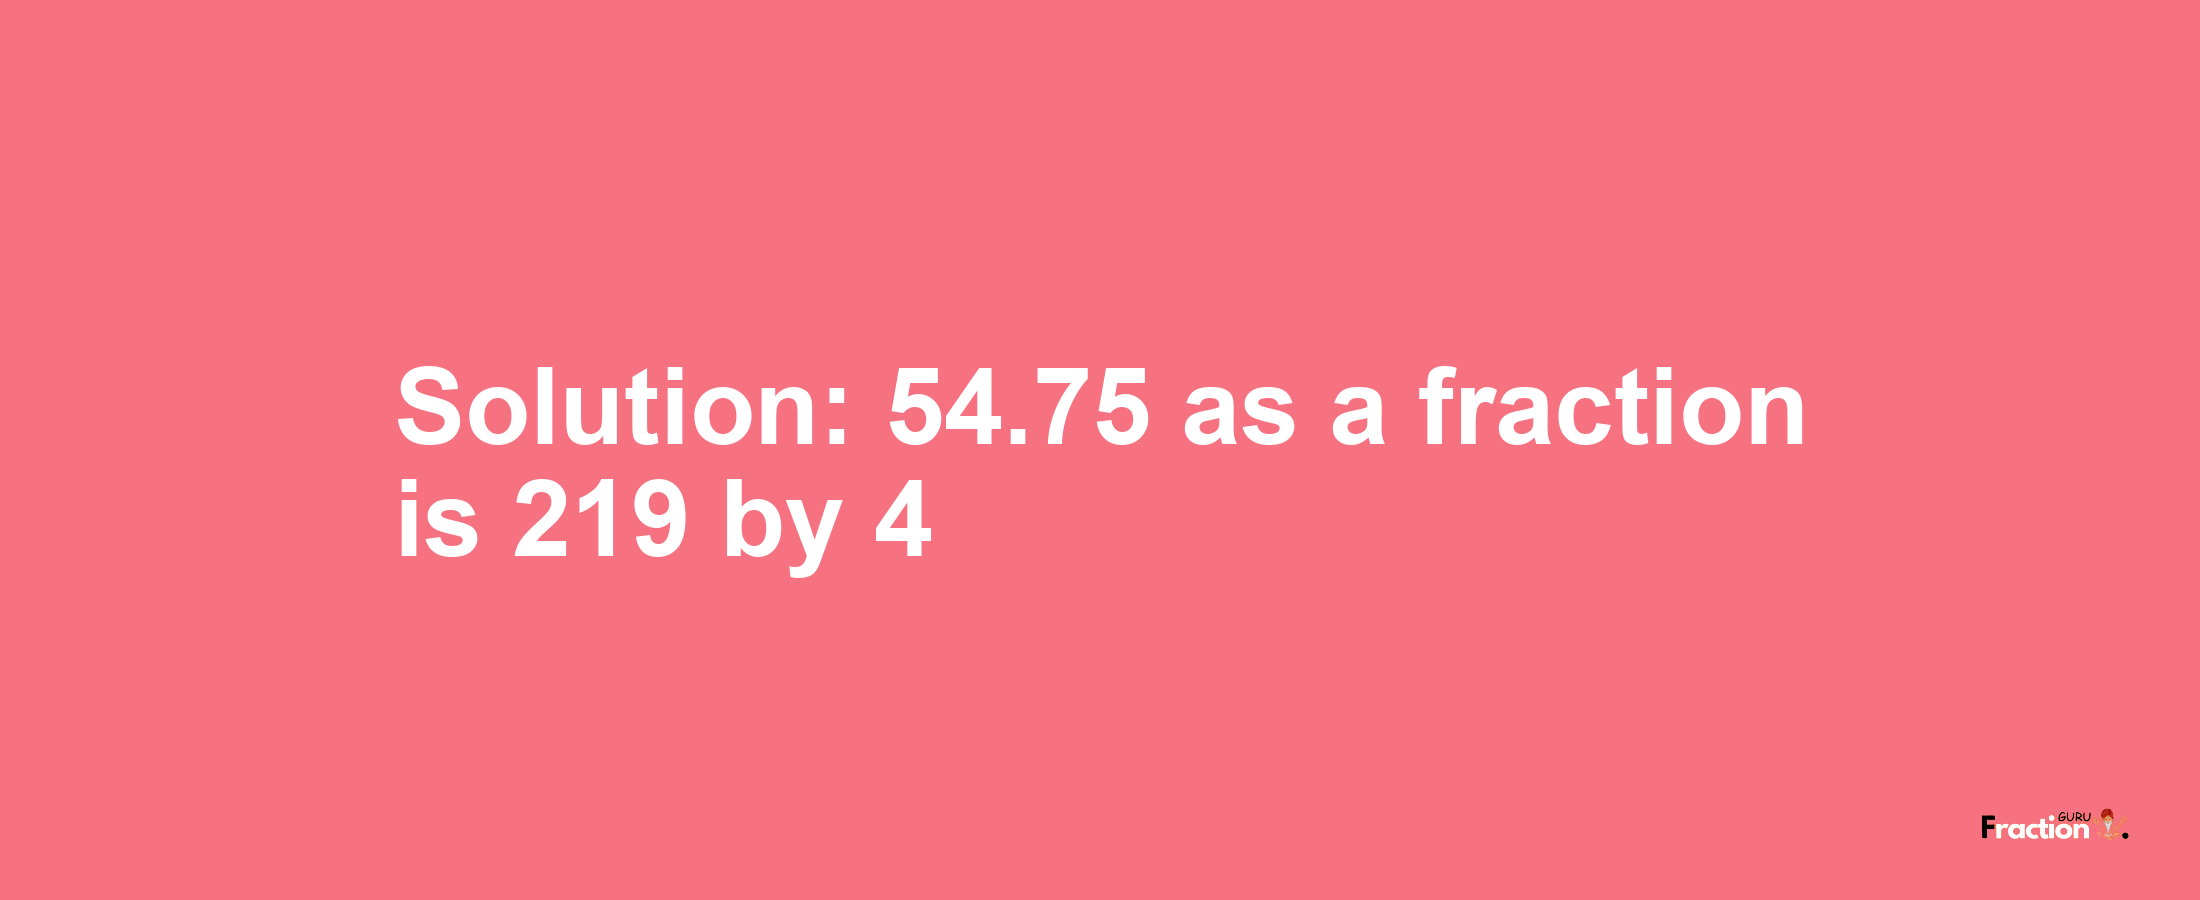 Solution:54.75 as a fraction is 219/4